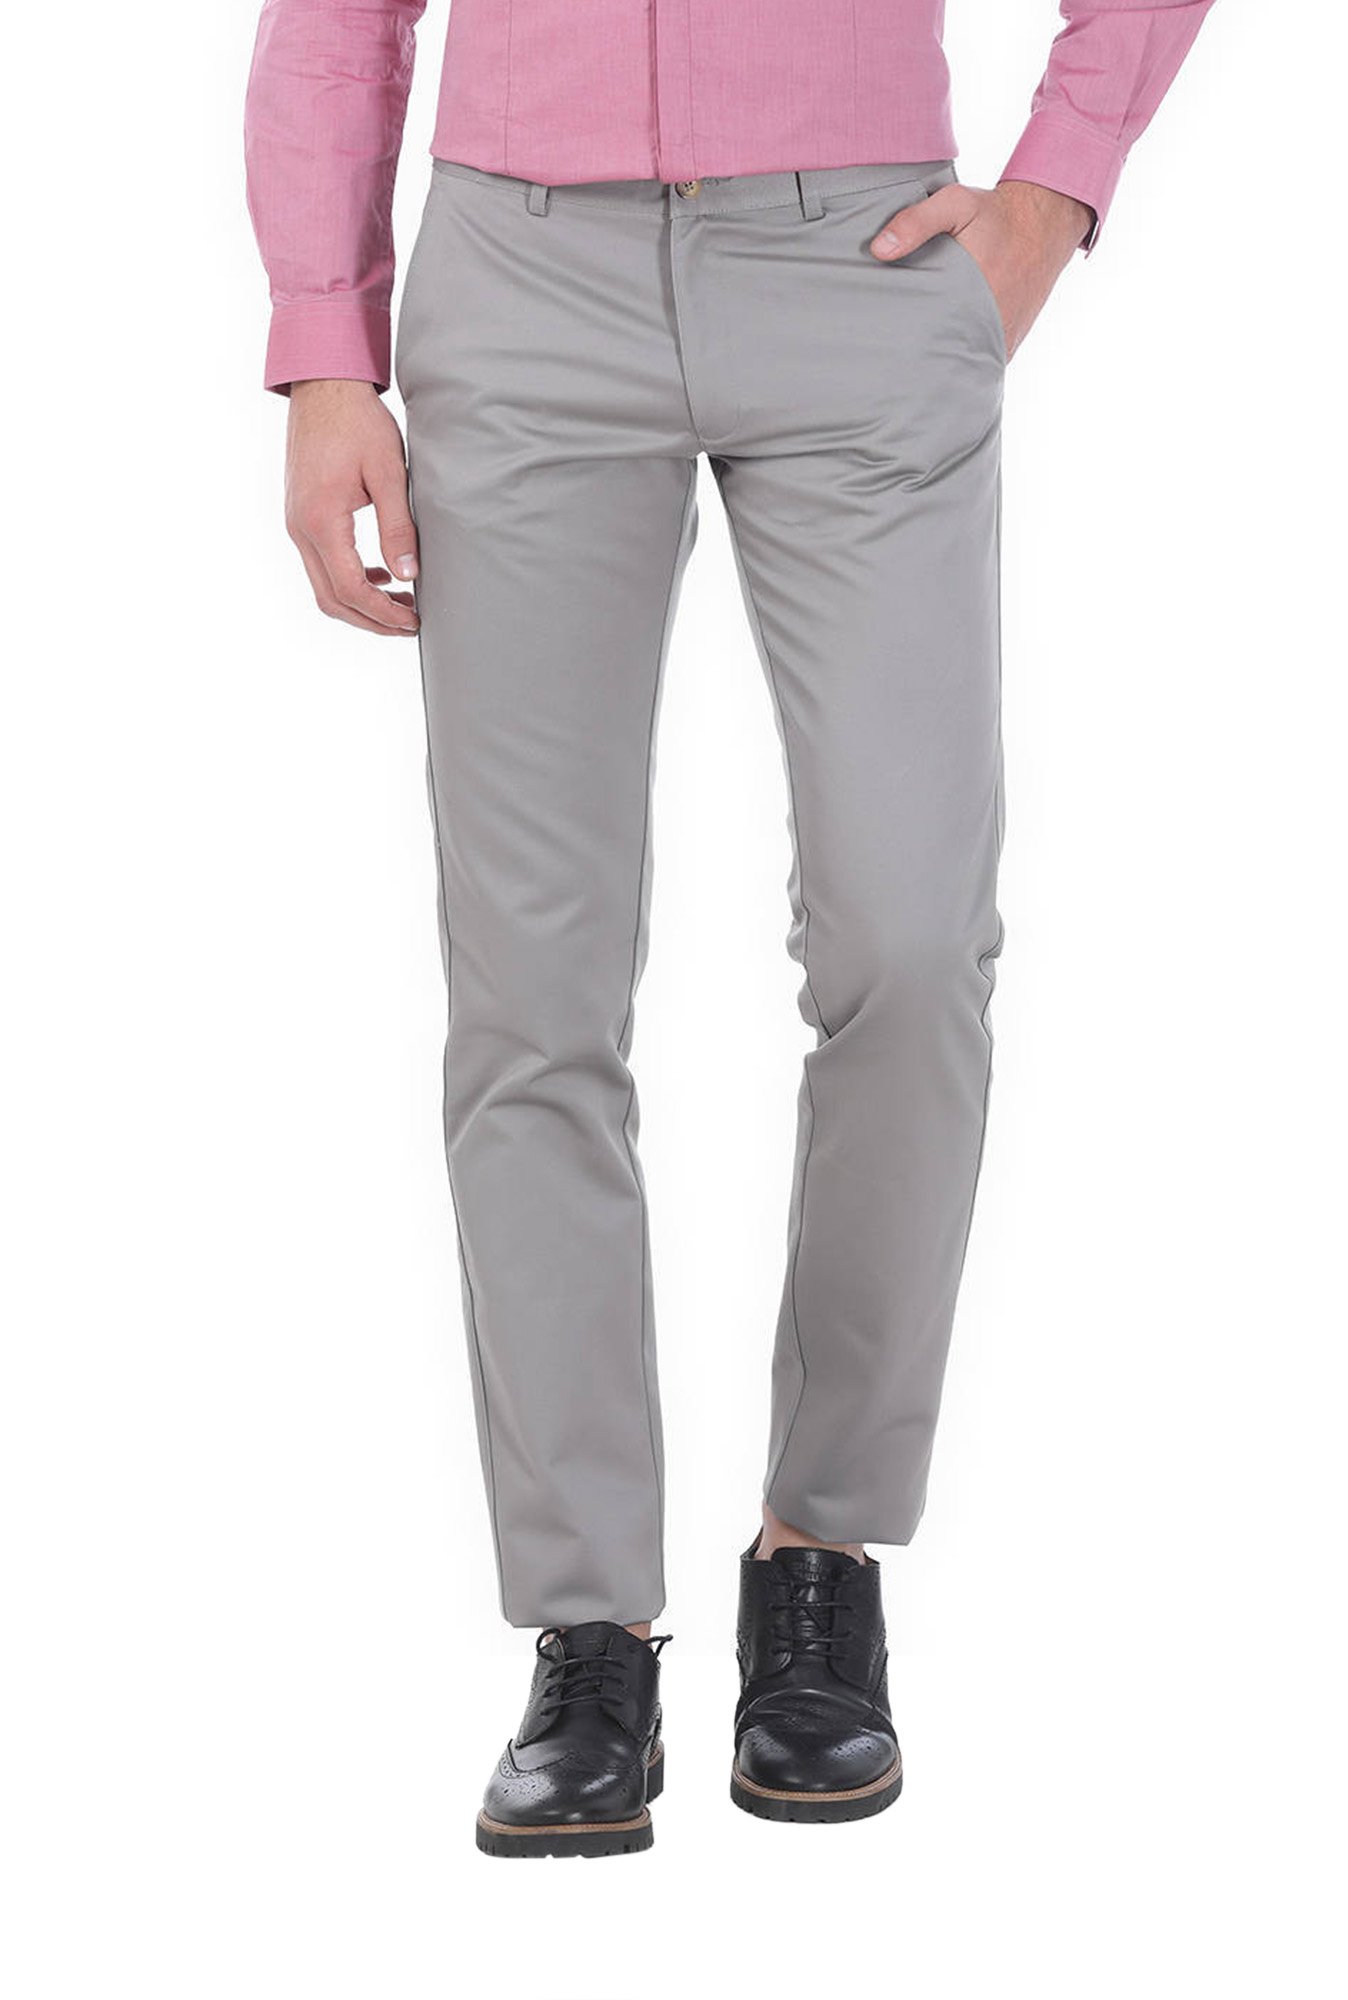 Buy BASICS Men Beige Solid Tapered fit Chinos Online at Low Prices in India   Paytmmallcom